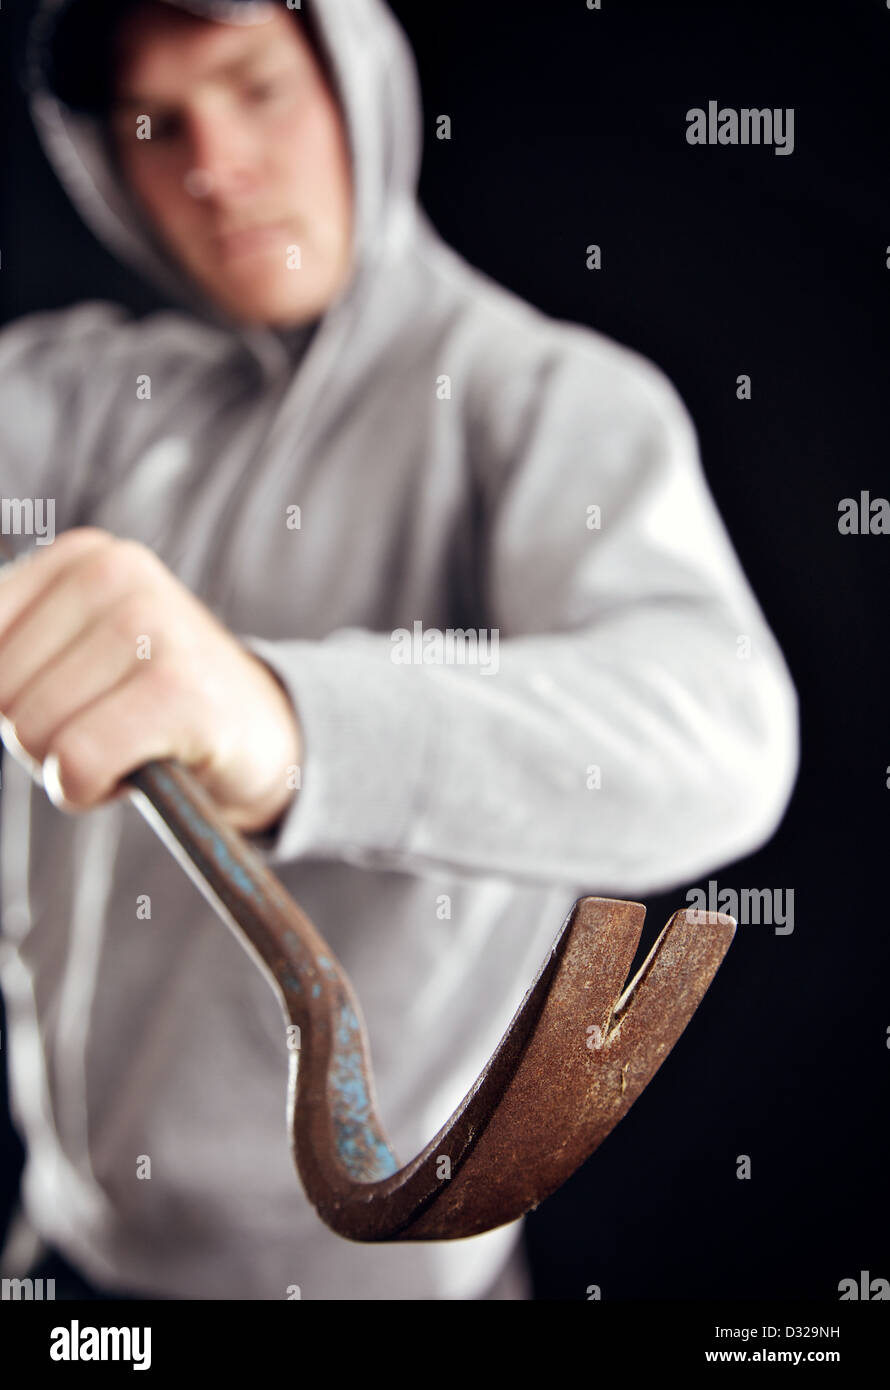 Intruder uses a crowbar in breaking into your home Stock Photo